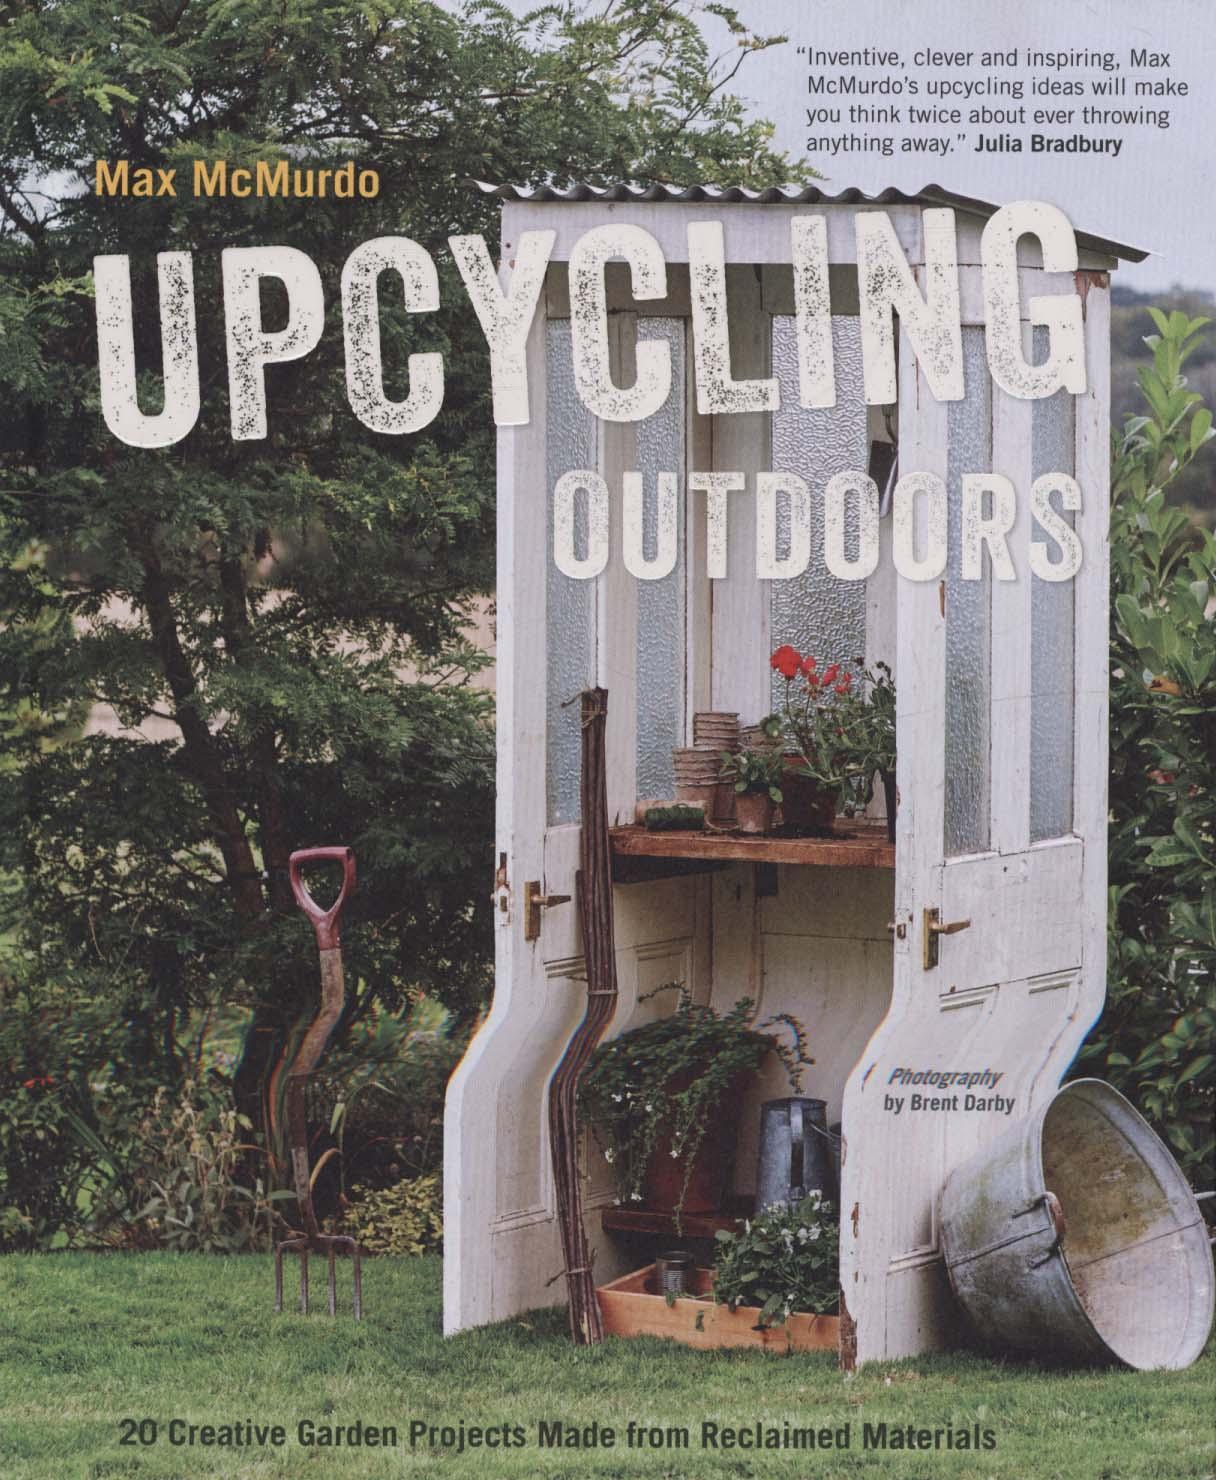 Upcycling Outdoors